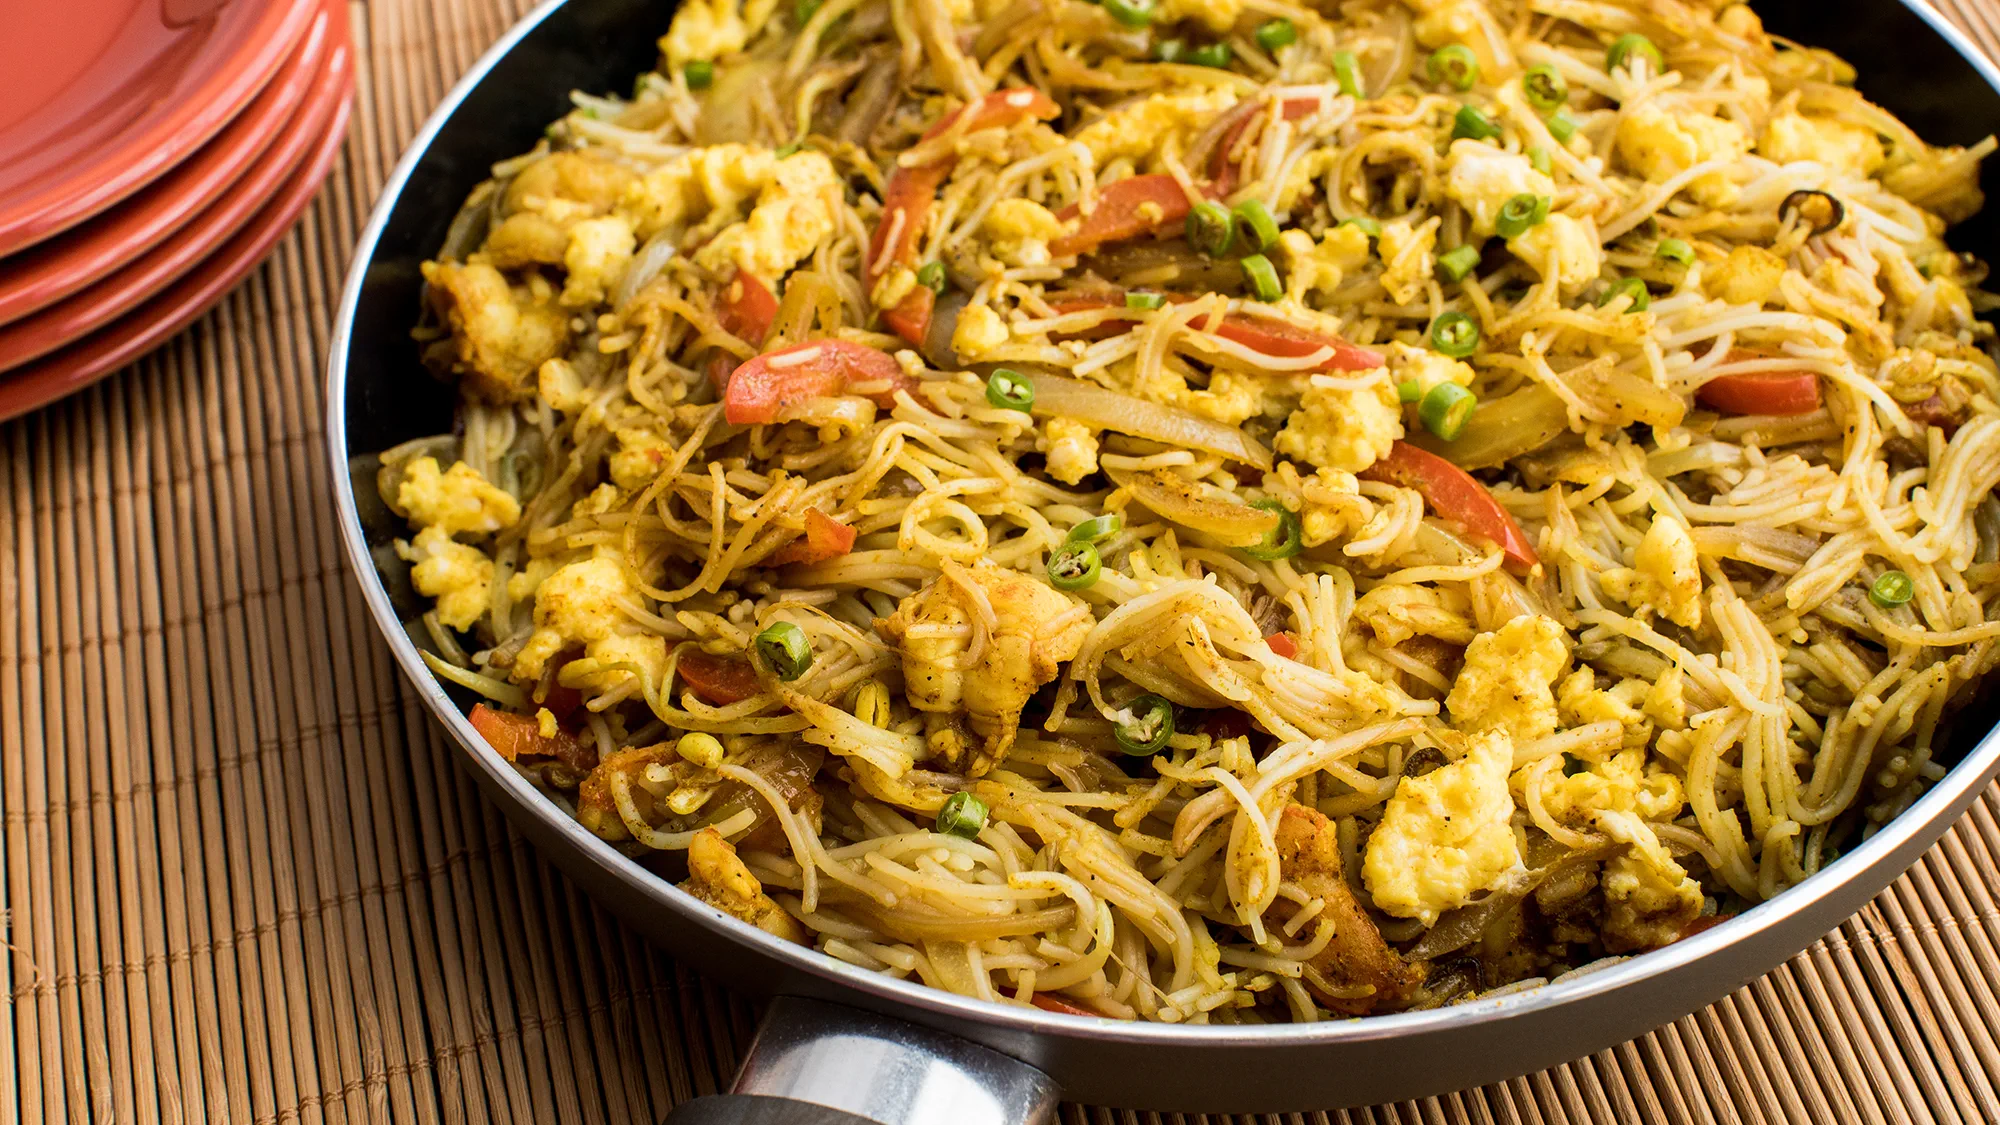 STIR FRIED CURRY VERMICELLI (RICE NOODLES)